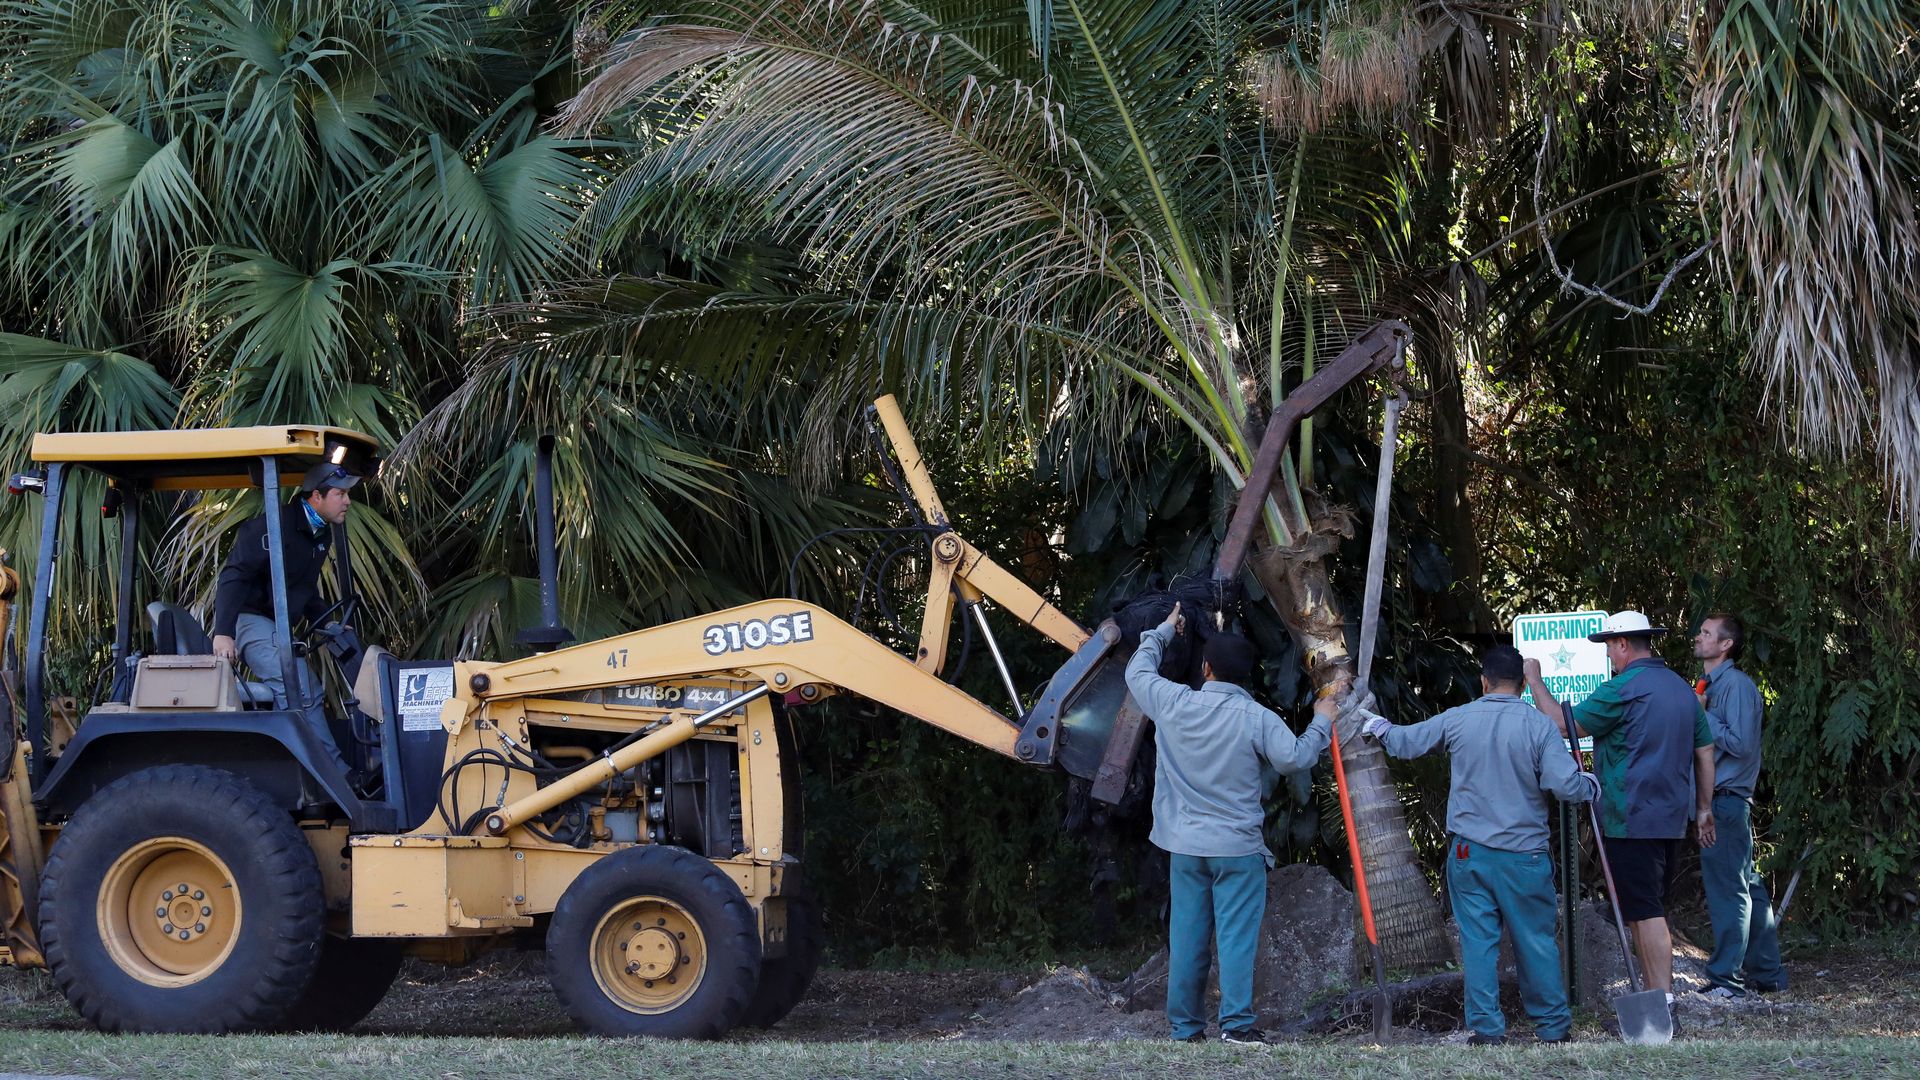 Workers are seen installing a palm tree near one of former President Trump's golf courses.